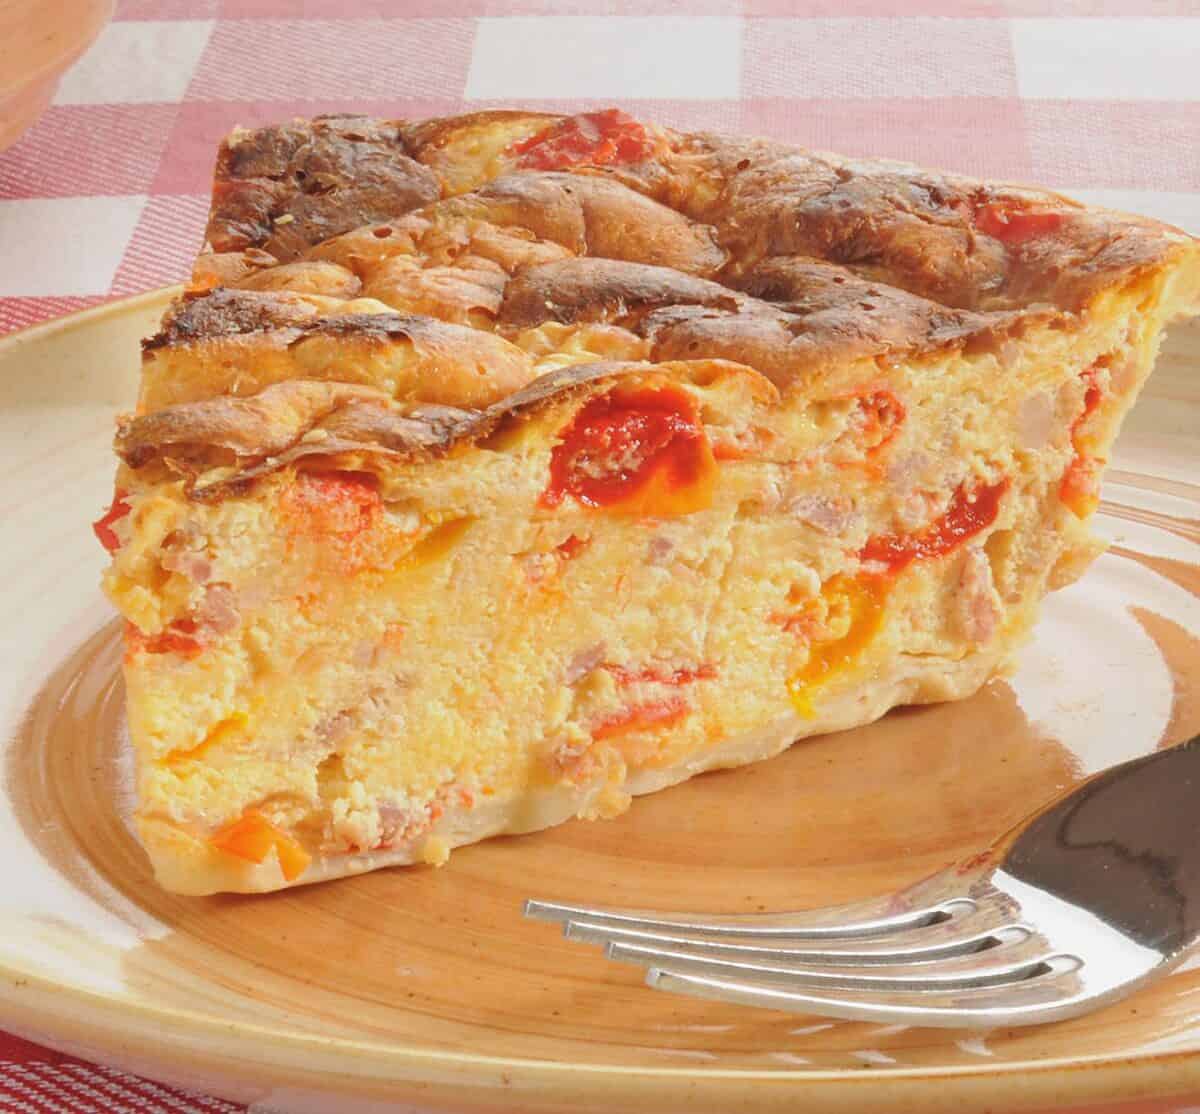  Indulge in this luxurious quiche